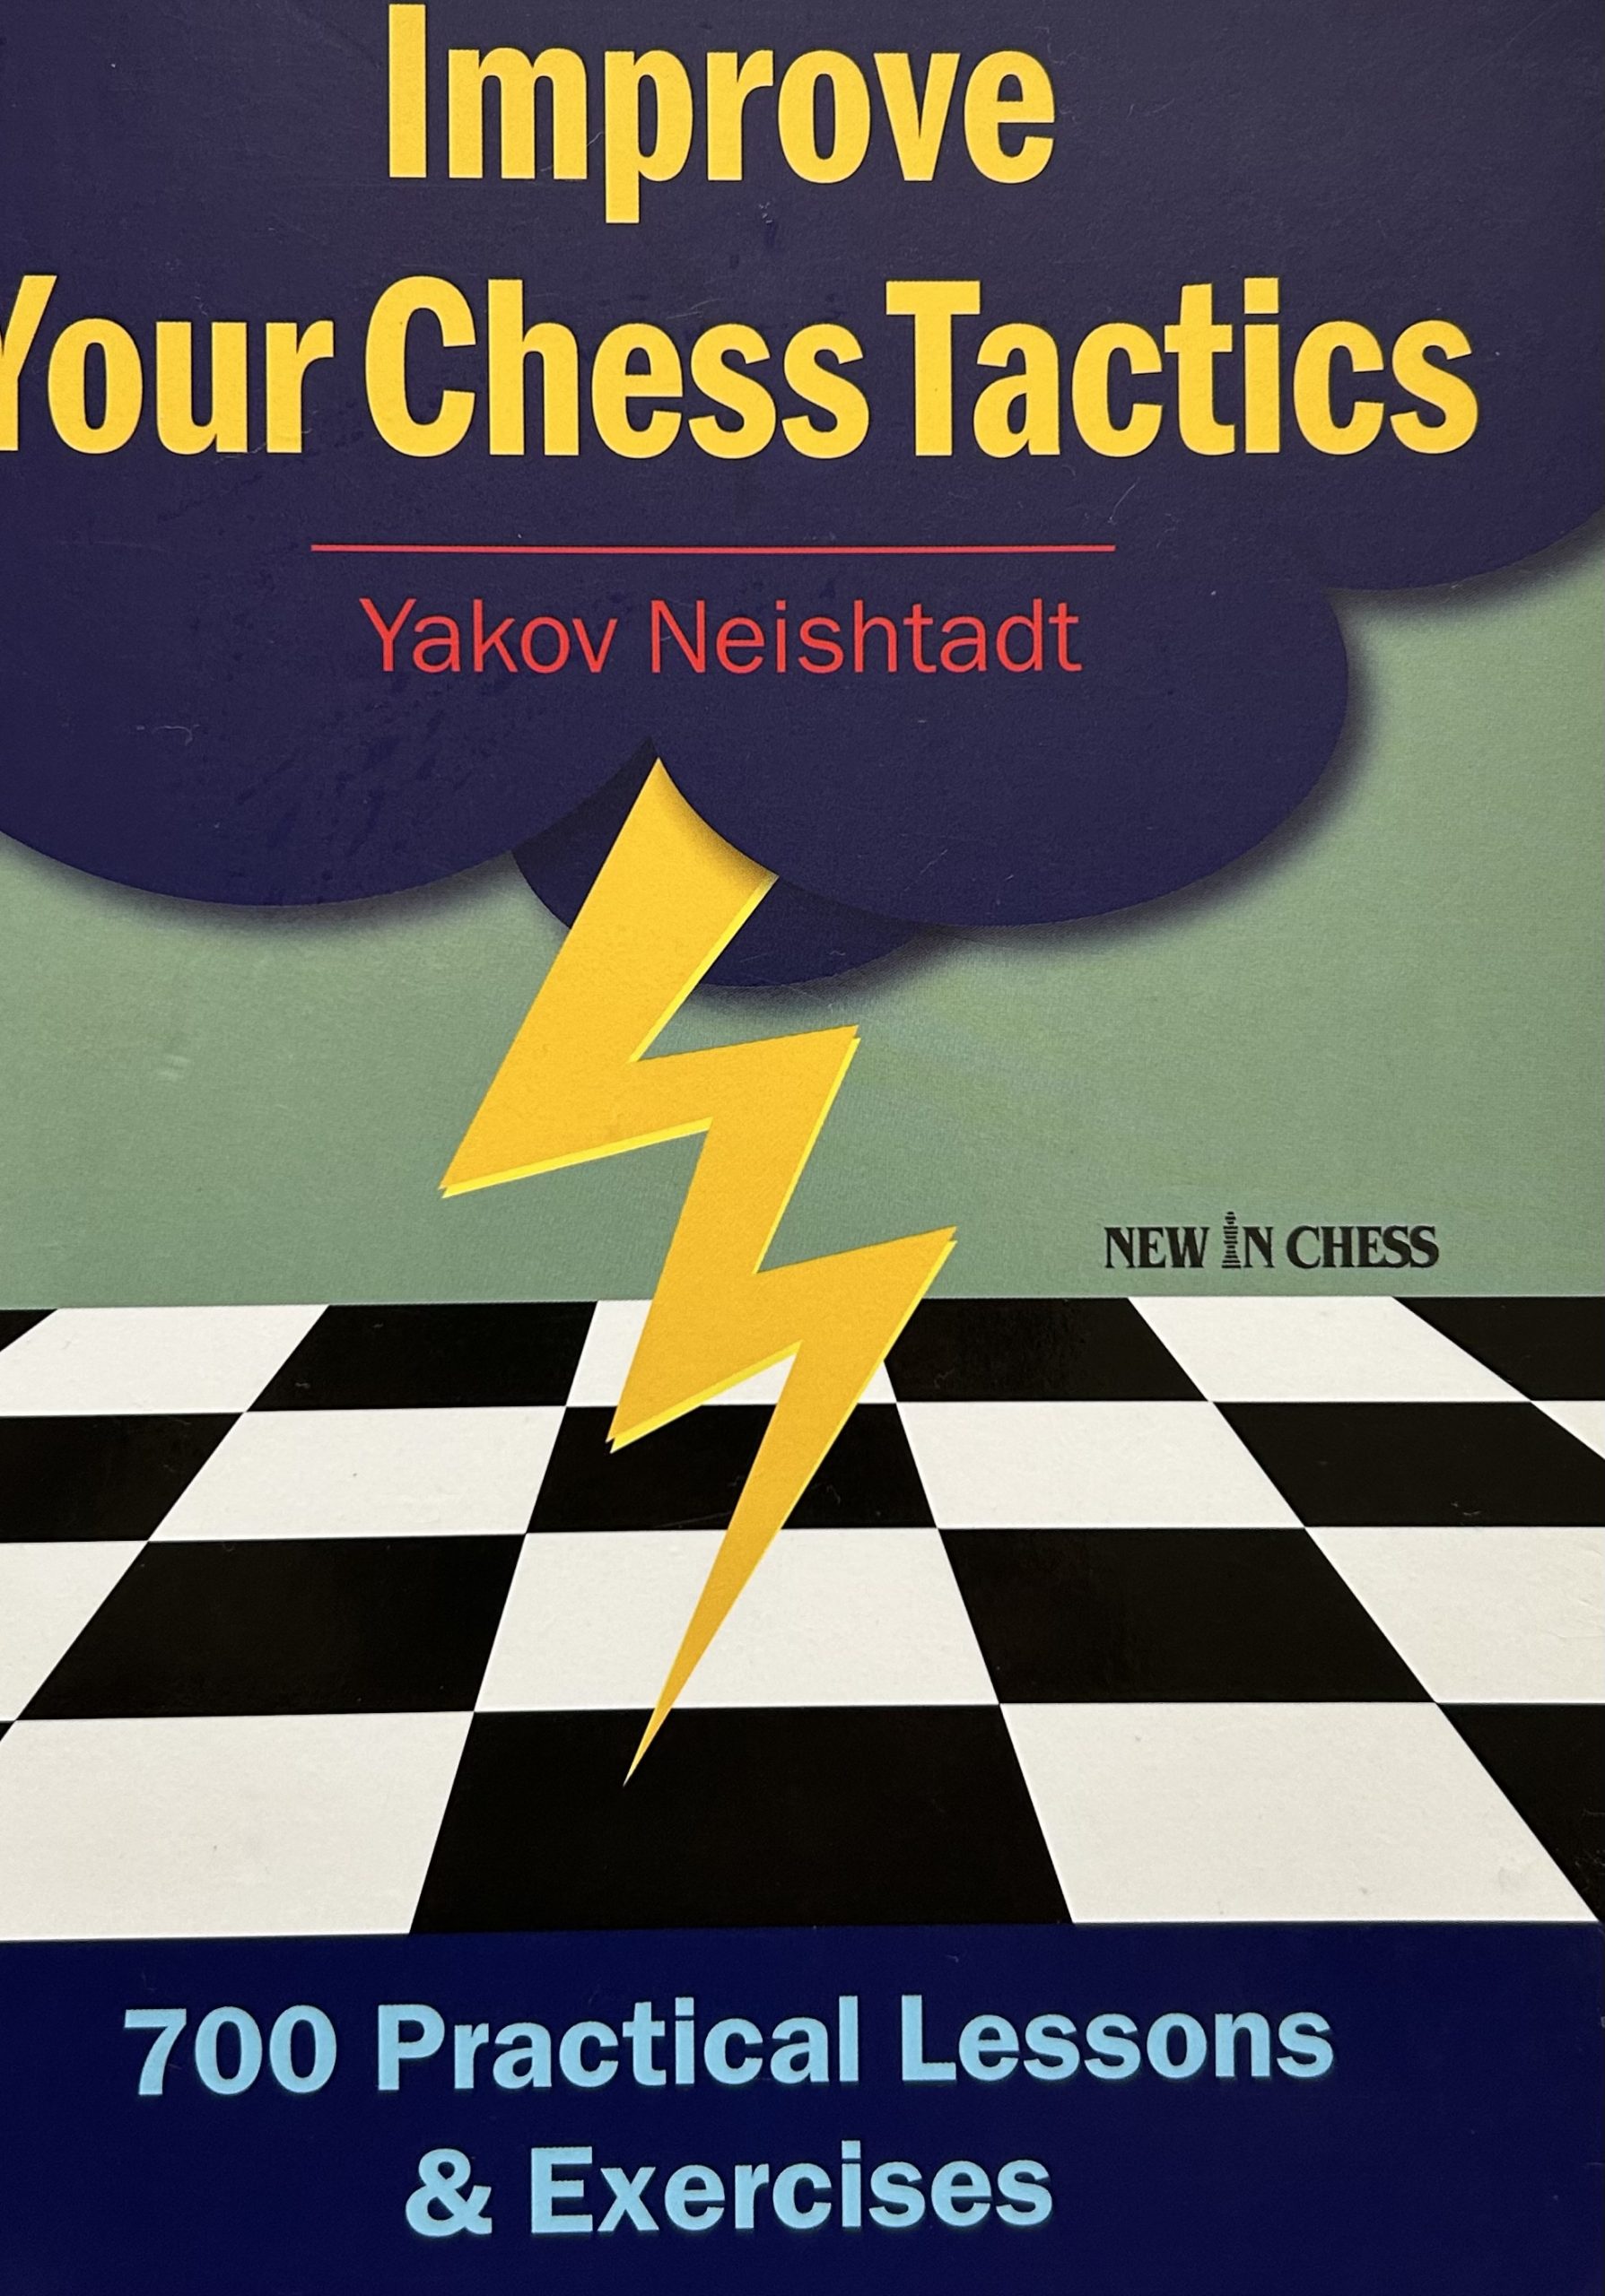 Improve Your Chess Tactics: 700 Practical Lessons & Exercises by Yakov Neishtadt